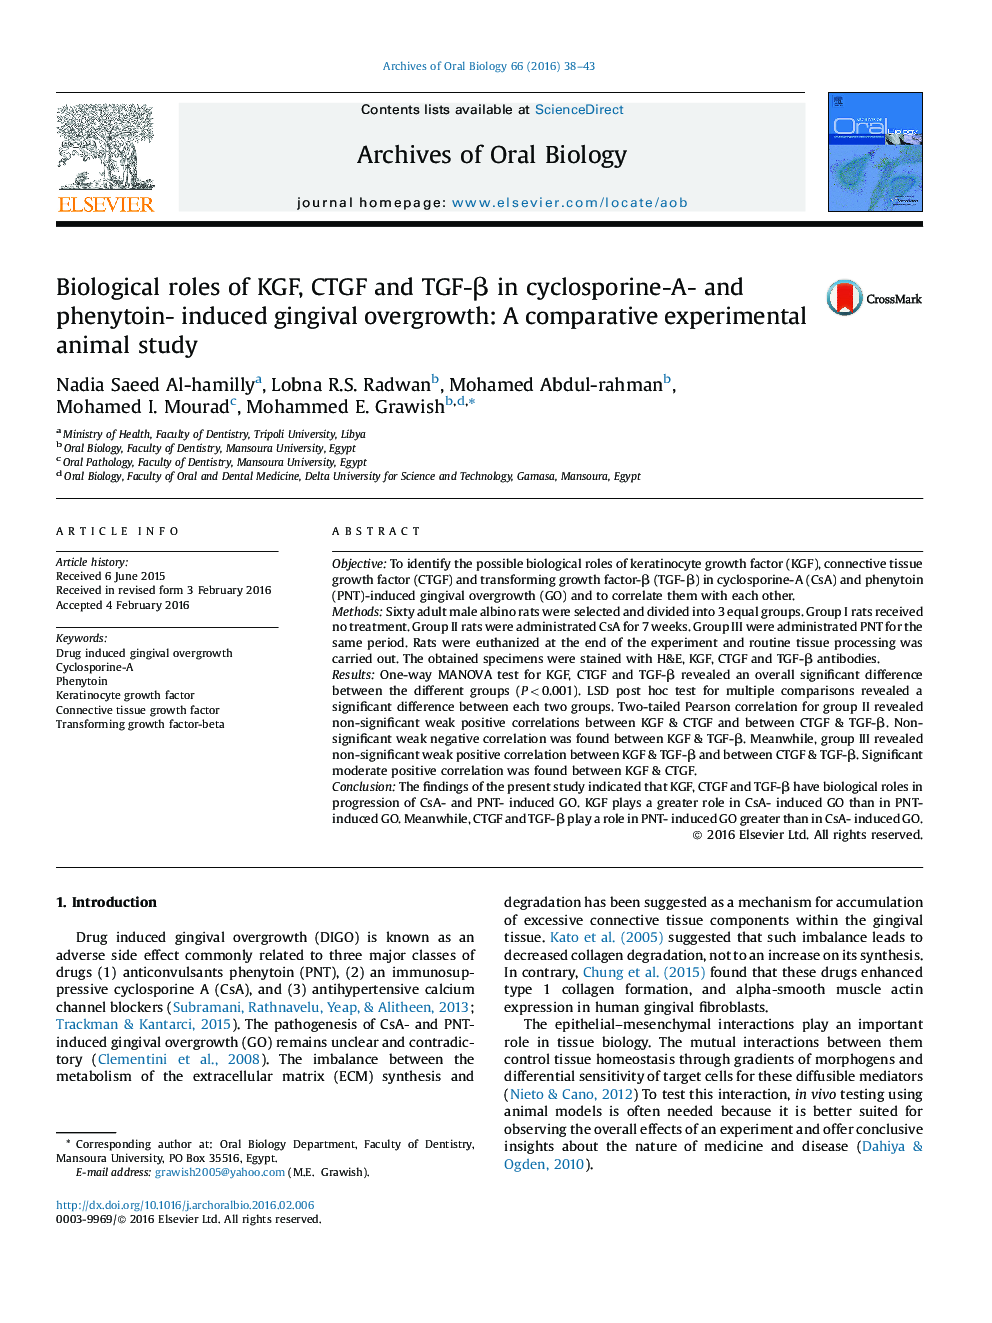 Biological roles of KGF, CTGF and TGF-Î² in cyclosporine-A- and phenytoin- induced gingival overgrowth: A comparative experimental animal study